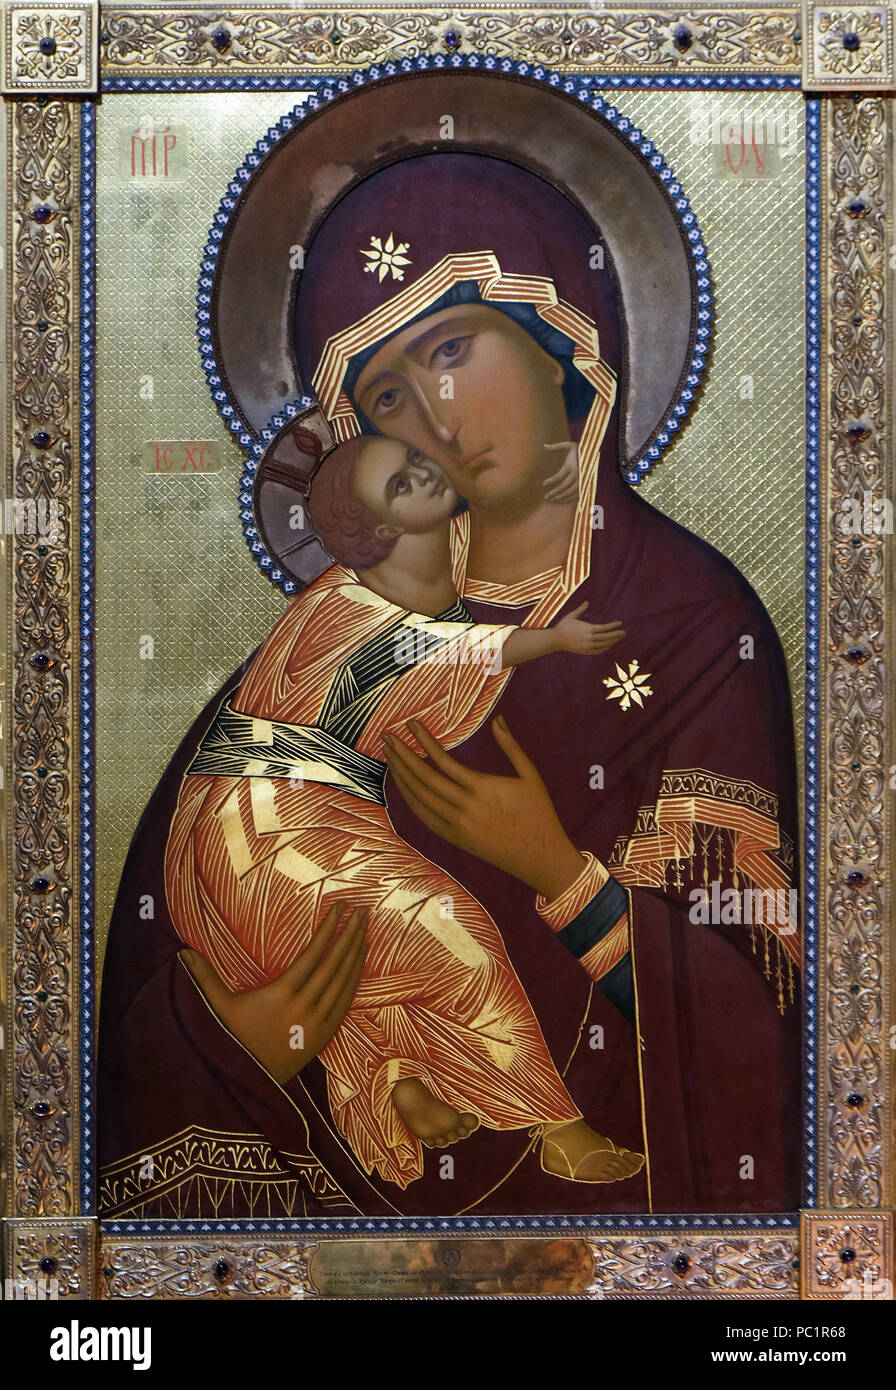 Virgin Mary with baby Jesus, Russian icon in Notre Dame Cathedral, Paris, UNESCO World Heritage Site in Paris, France Stock Photo